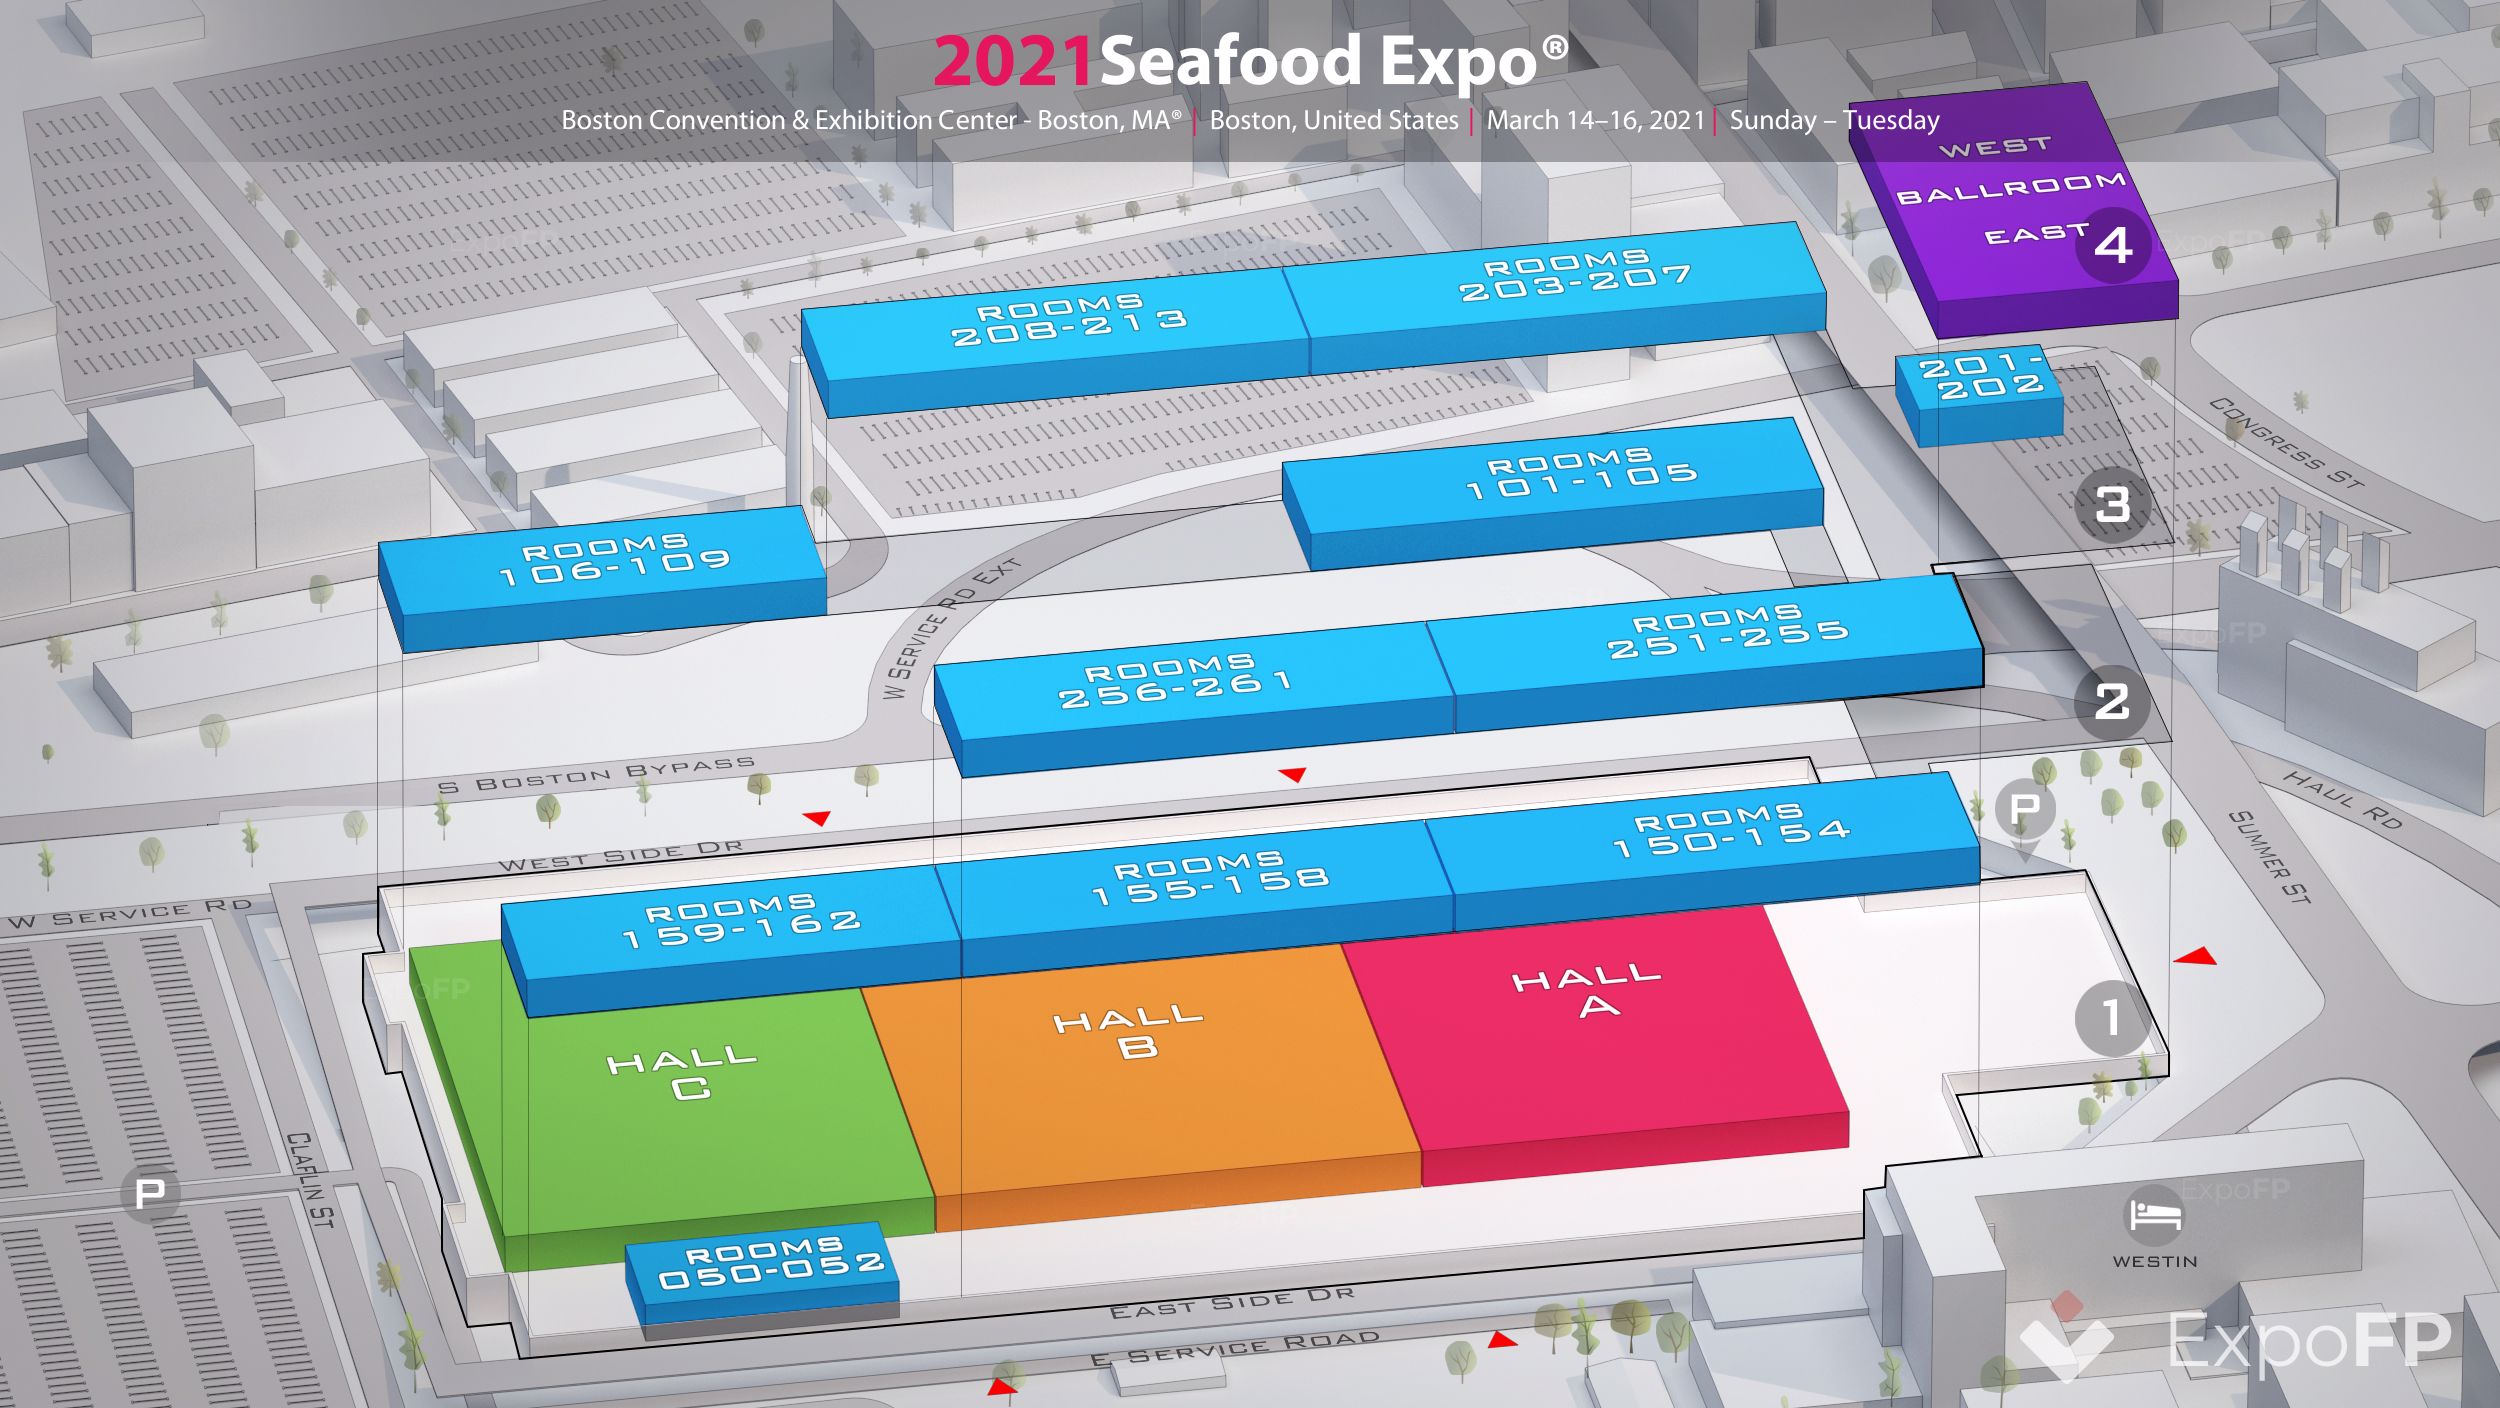 Seafood Expo 2021 in Boston Convention & Exhibition Center